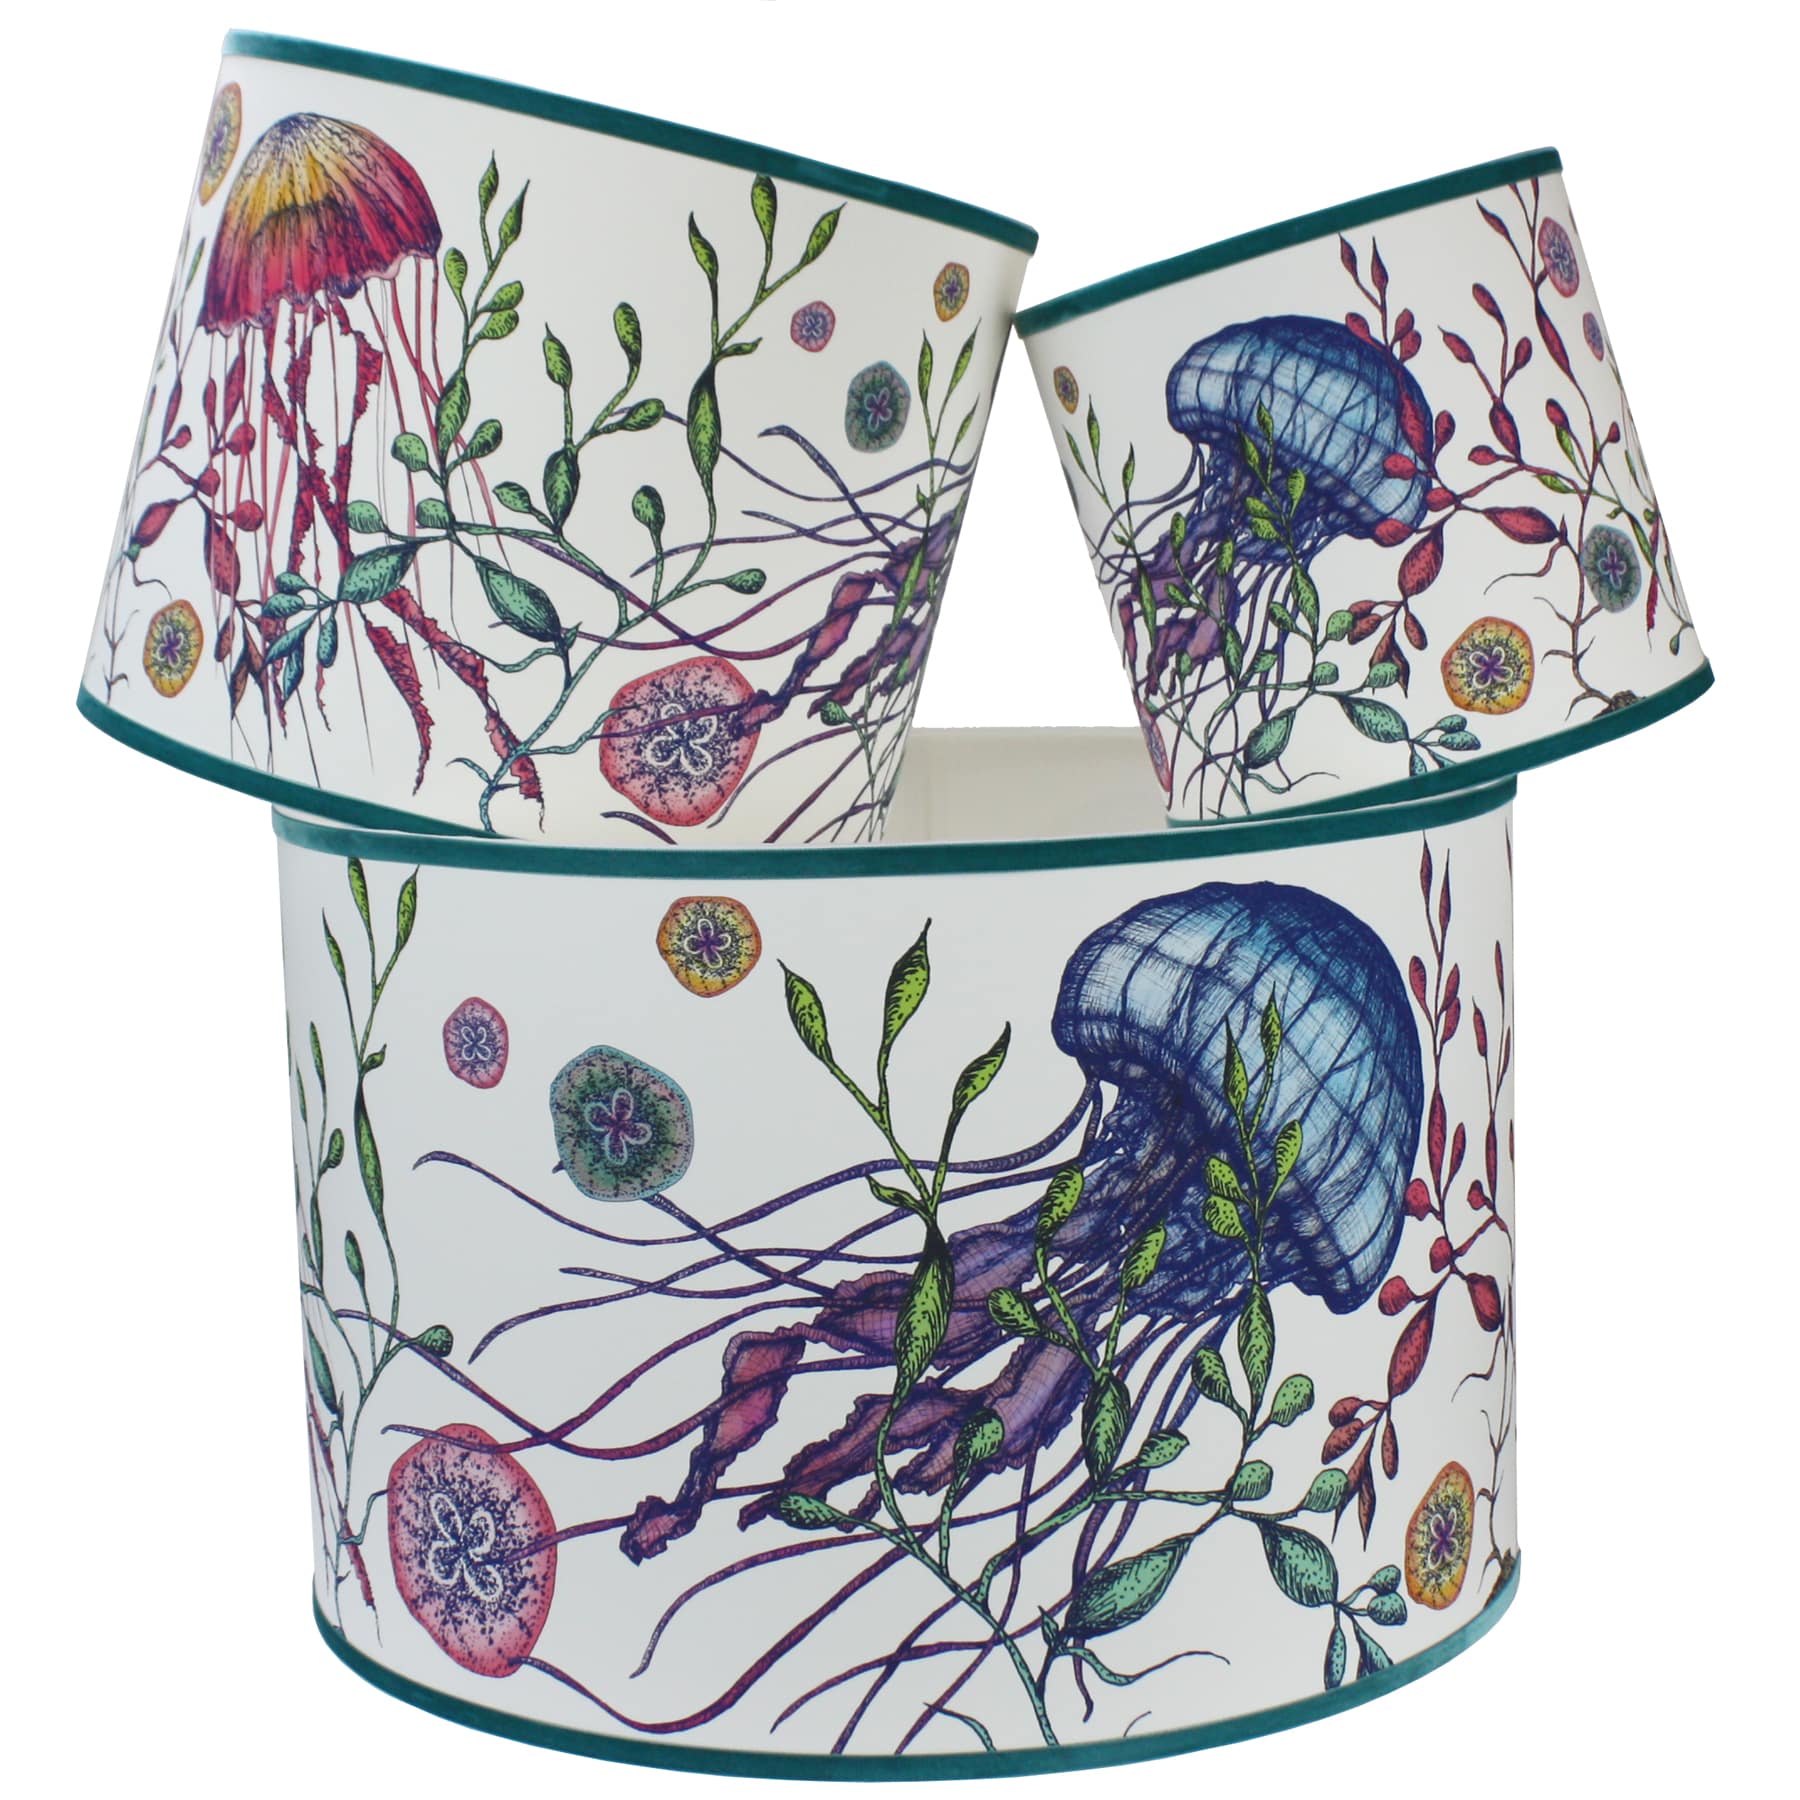 Canyons Reef White Shade With Jellyfish Design in bright colours with a aqua trim on the edge of the shade.The lampshades are shown in a stack of three showing all three sizes.